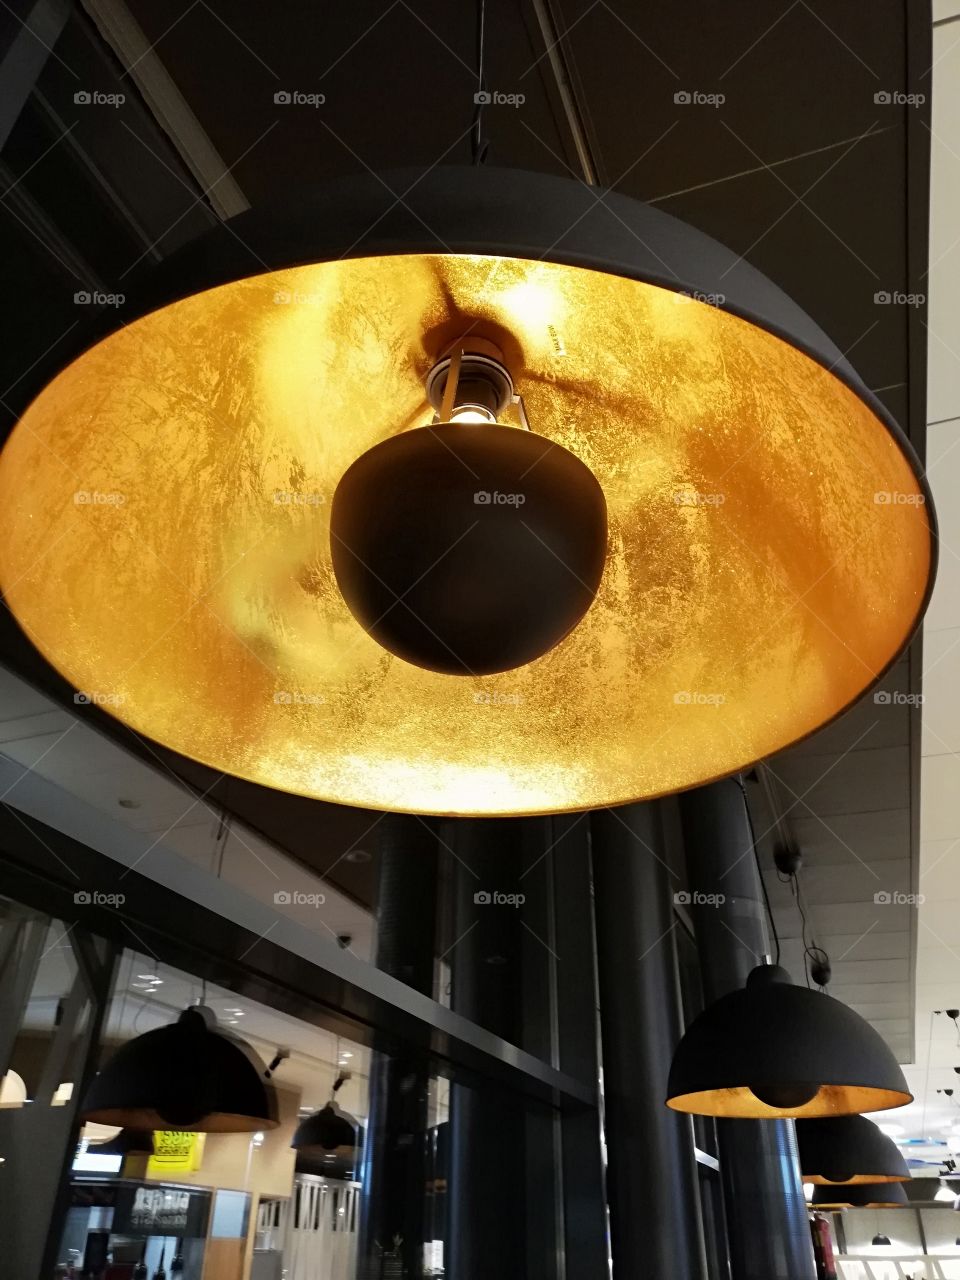 A large round lamp hanging from the ceiling in the restaurant. The surface of the light is matt black and inside it is yellow golden color with bright reflection, the black lid in the middle.